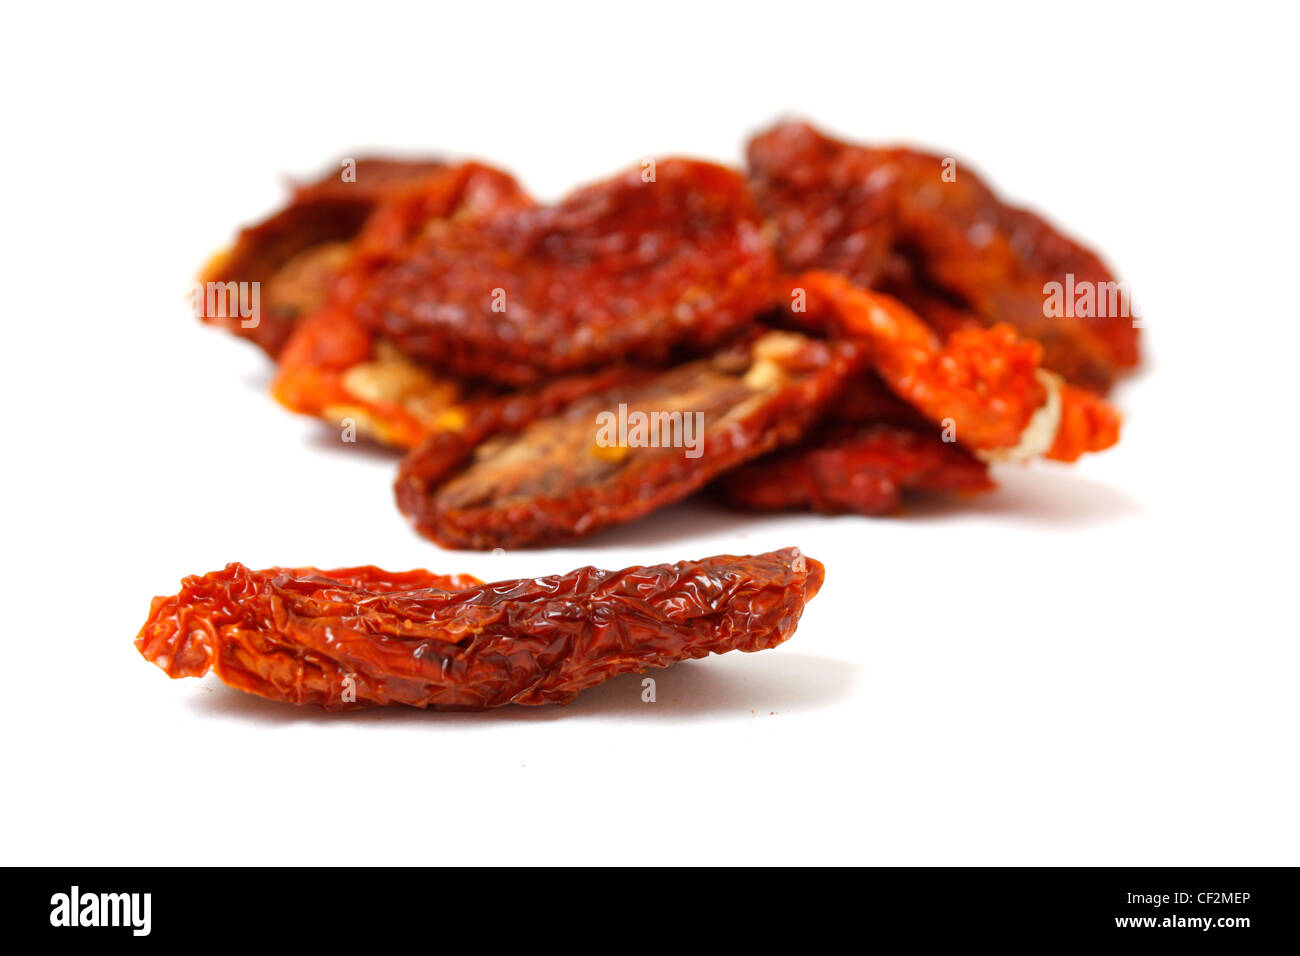 Dried tomatoes isolated on white Stock Photo